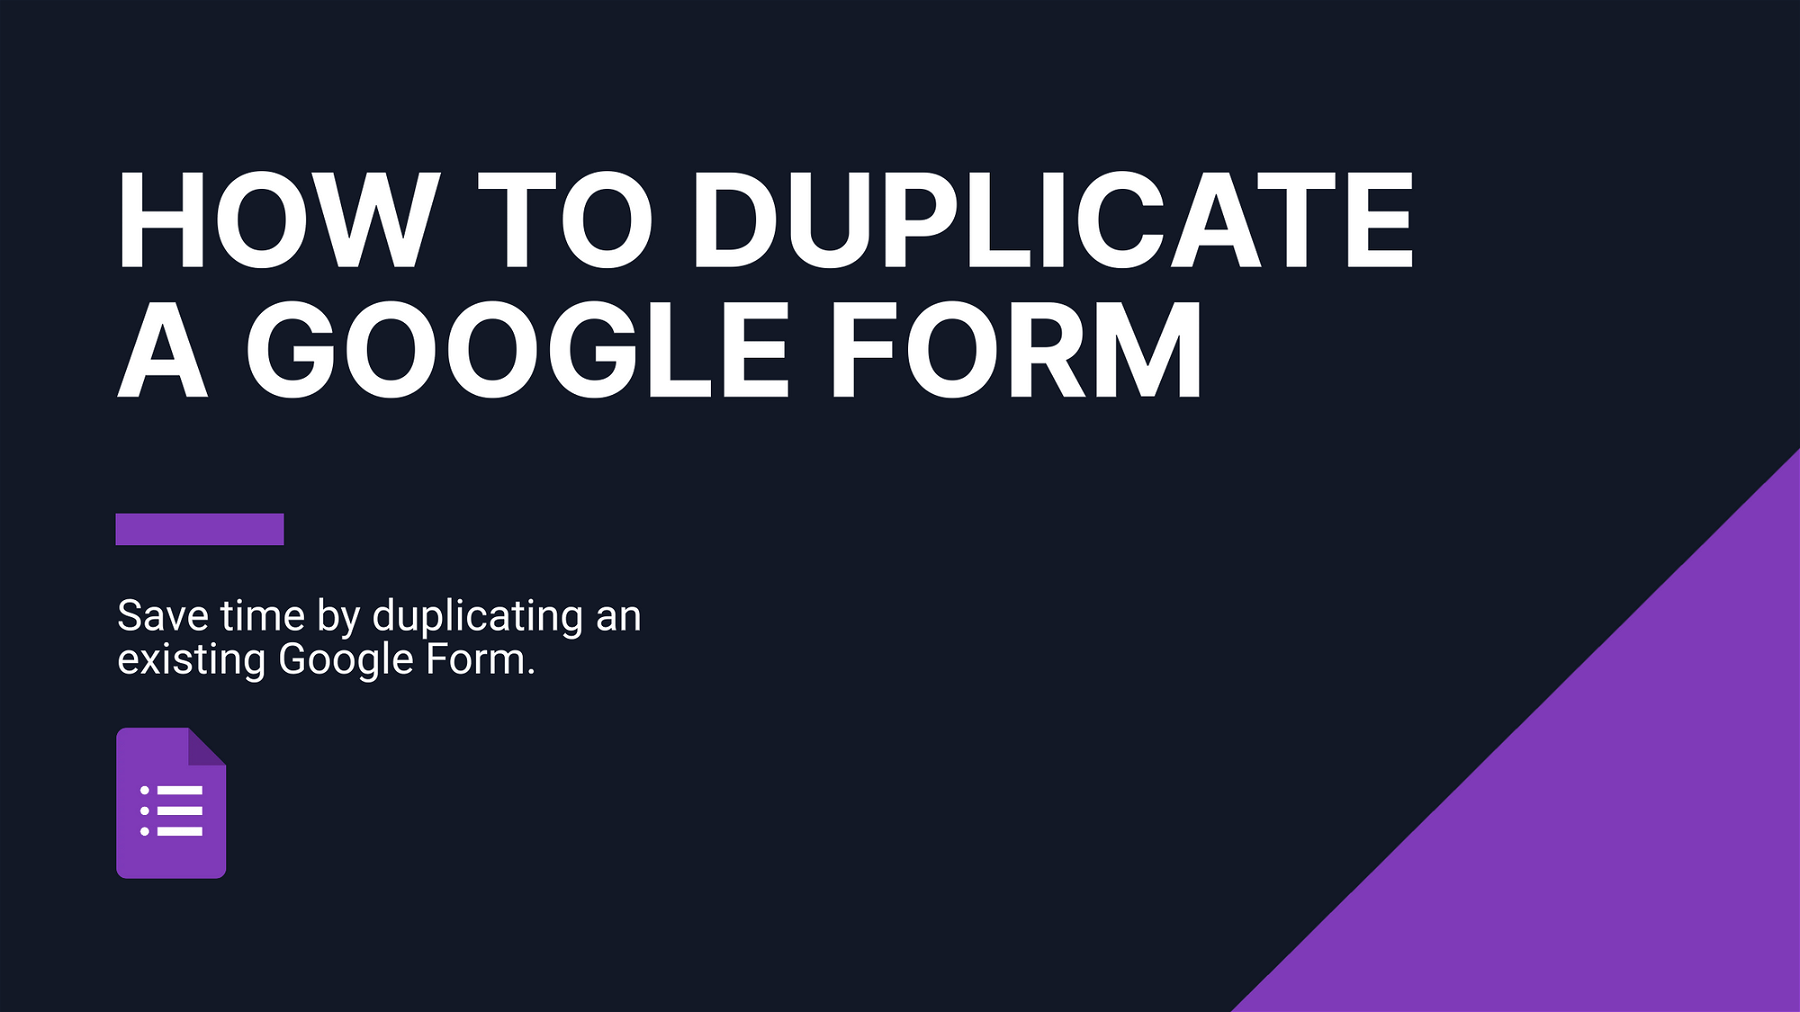 How to Duplicate a Google Form: A Step-by-Step Guide